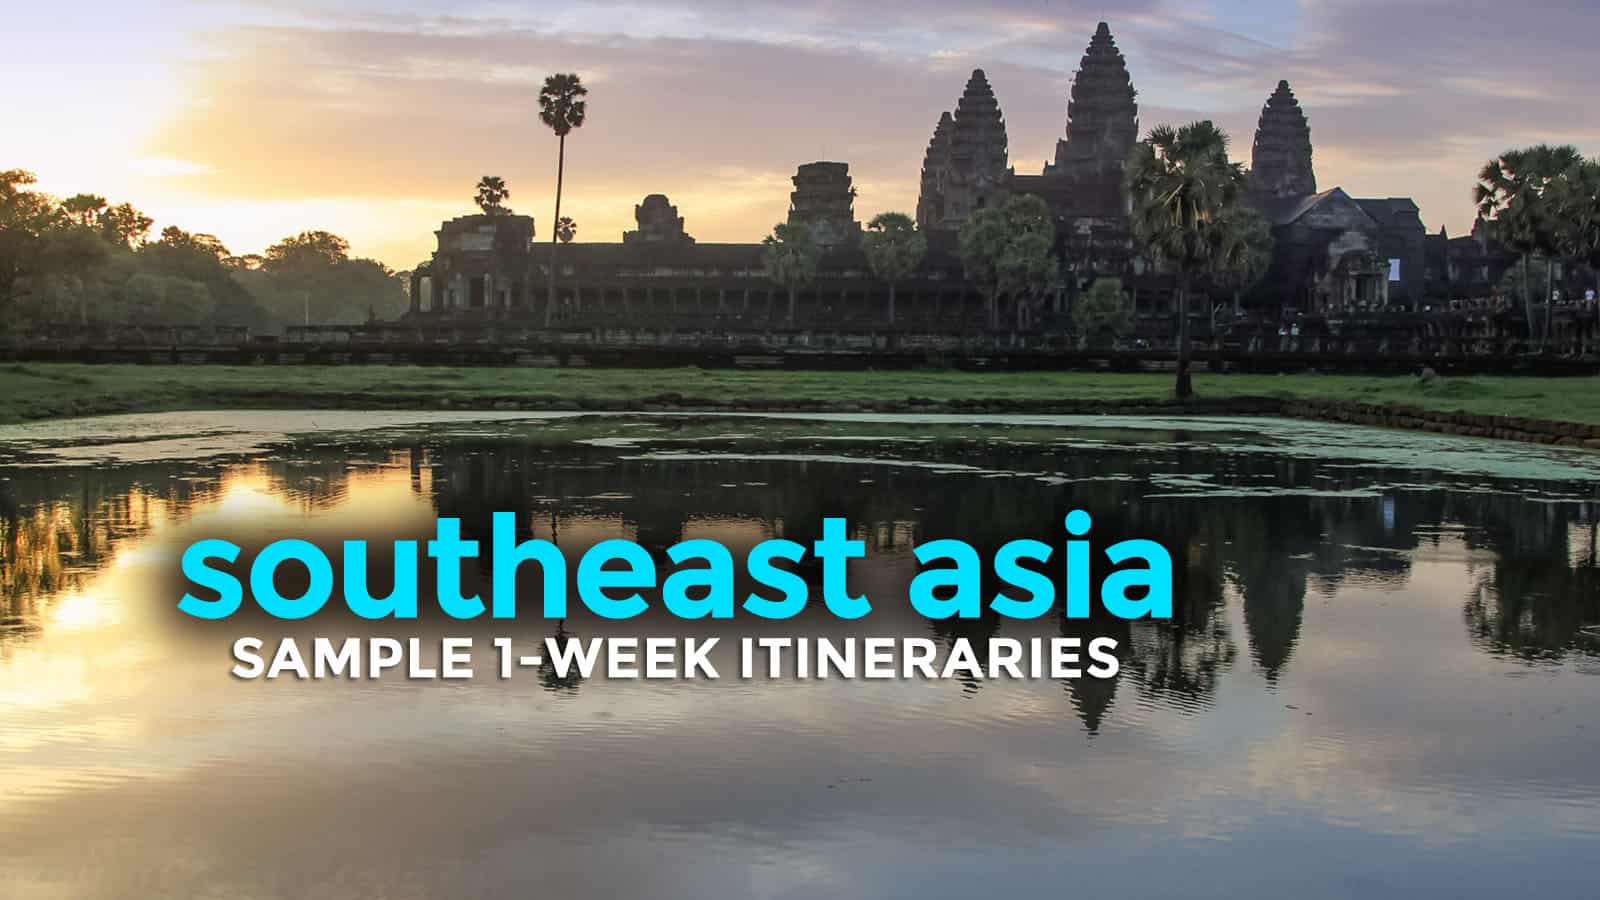 Sample SOUTHEAST ASIA Itineraries: 5, 6, 7 Days